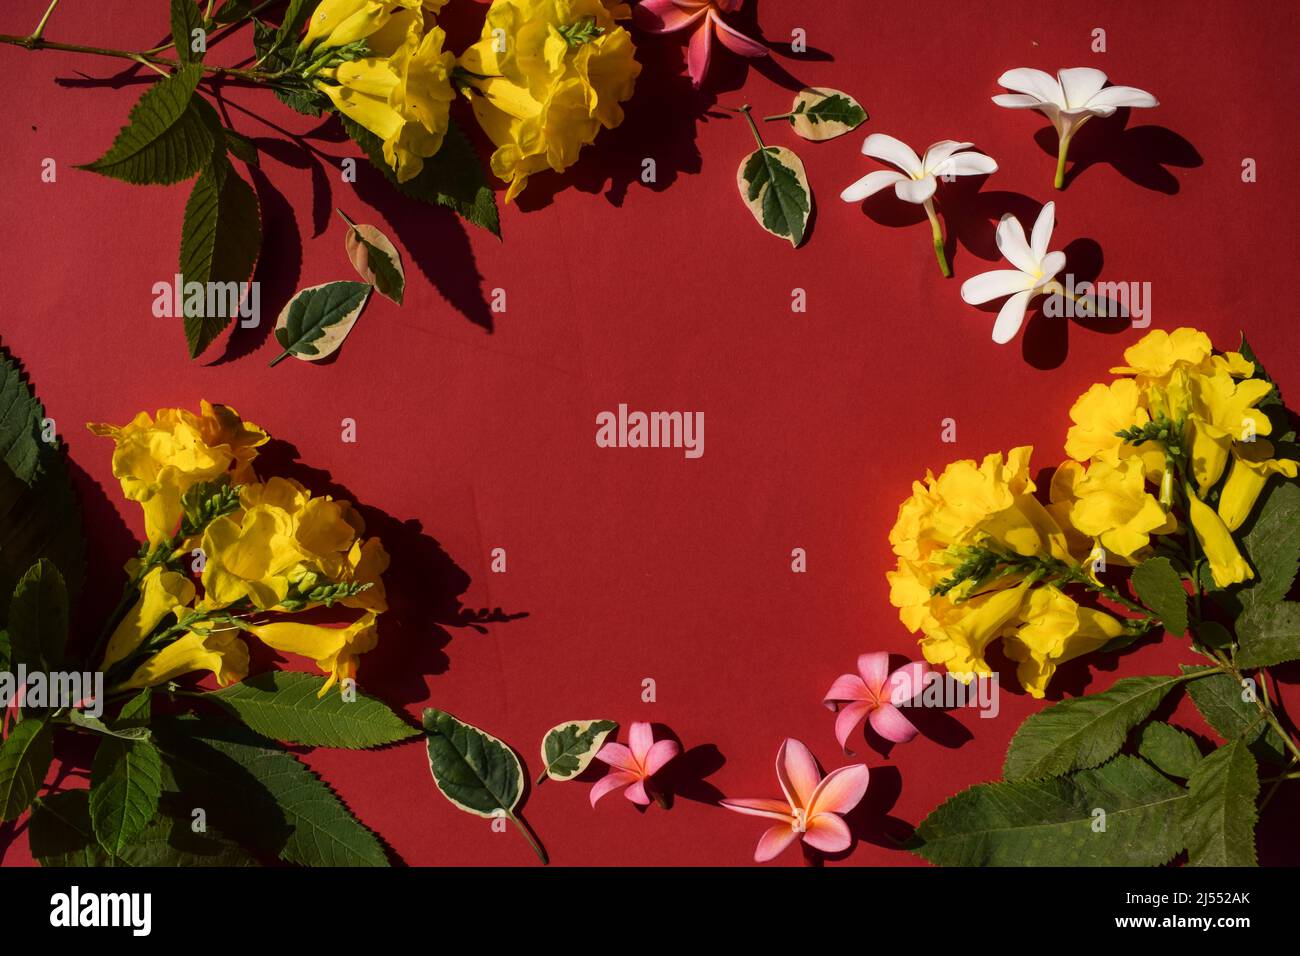 Flower background of multicolor flowers arranged in circle and blank space in middle to write texts and wishes. Floral background in red maroon backdr Stock Photo